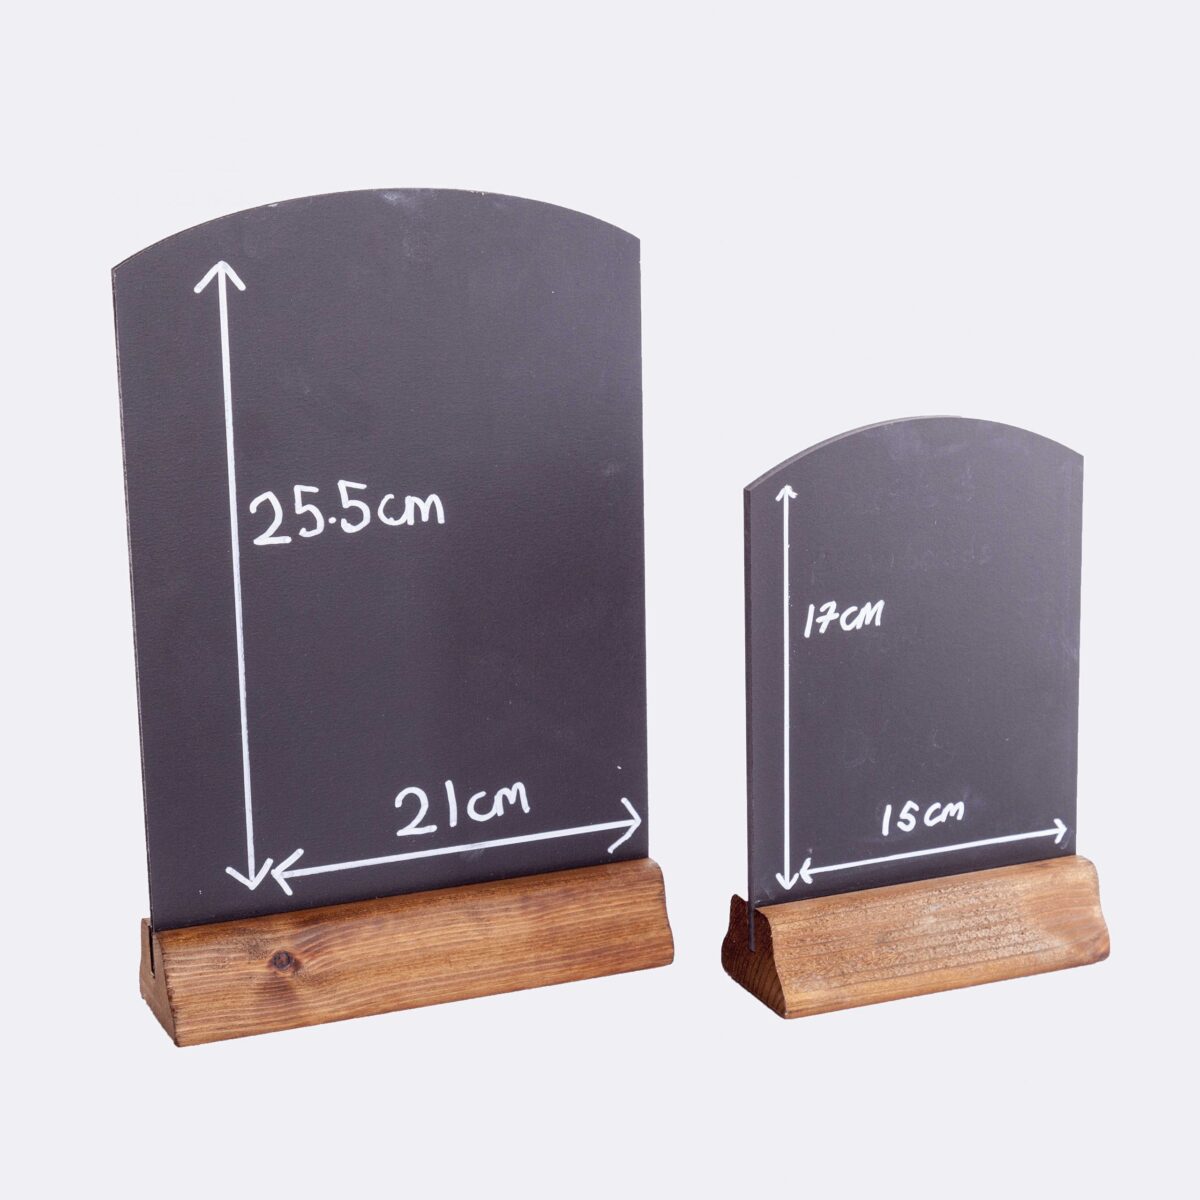 A4 Table Top Chalkboard with Wooden Base